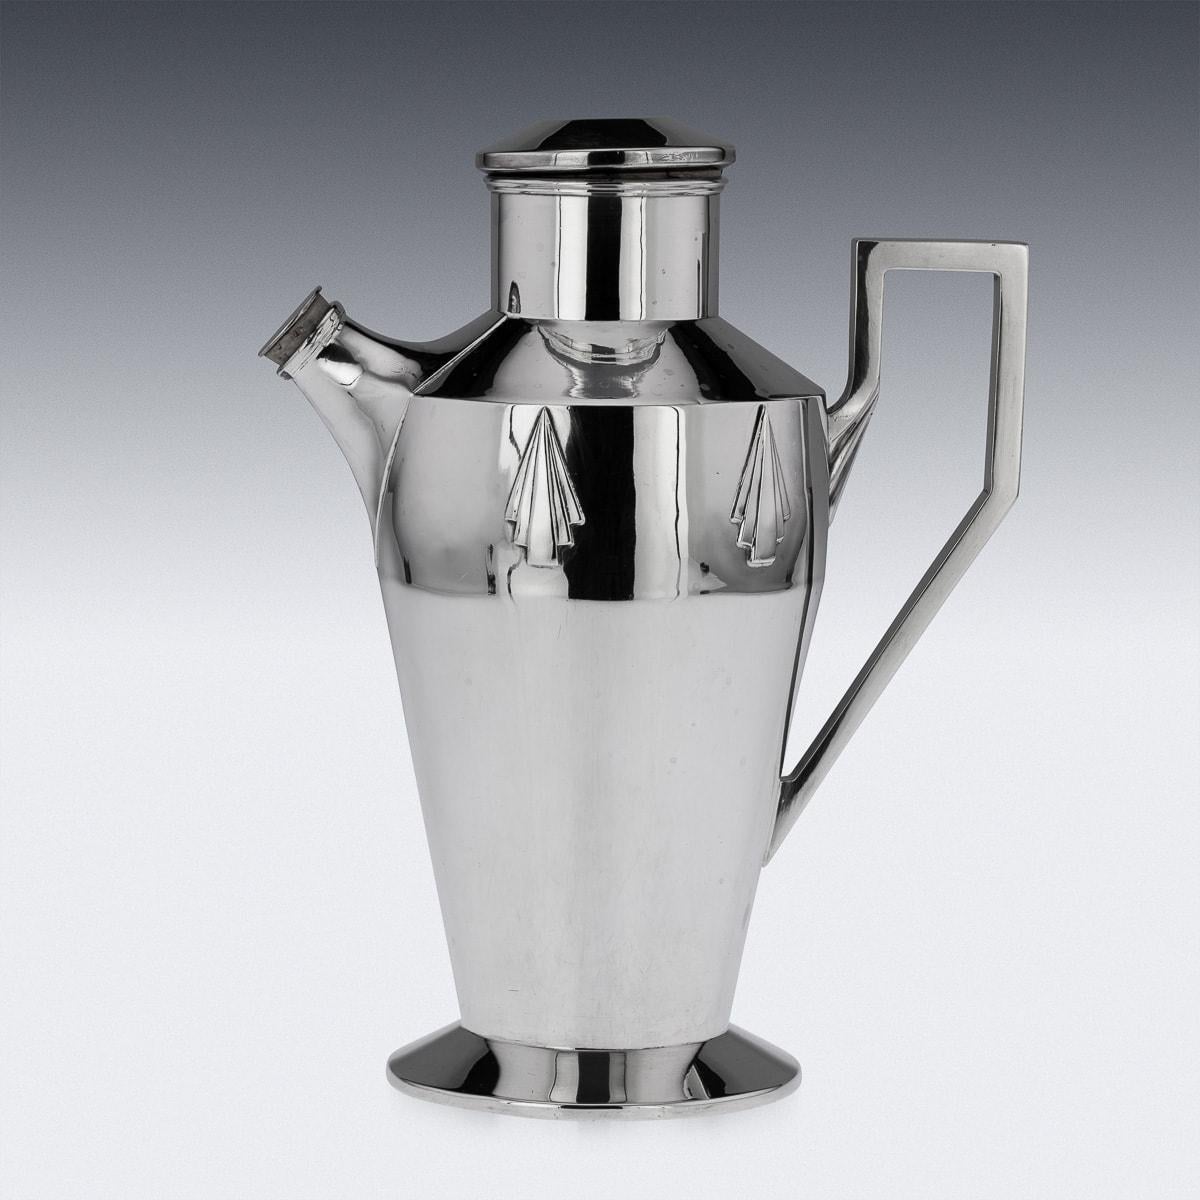 This is quite possibly the most stylish English silver cocktail shaker we have ever encountered - the clean angular handle and applied stylised shell motifs blend wonderfully with the elegant tapering cylindrical body. A real tour-de-force of the